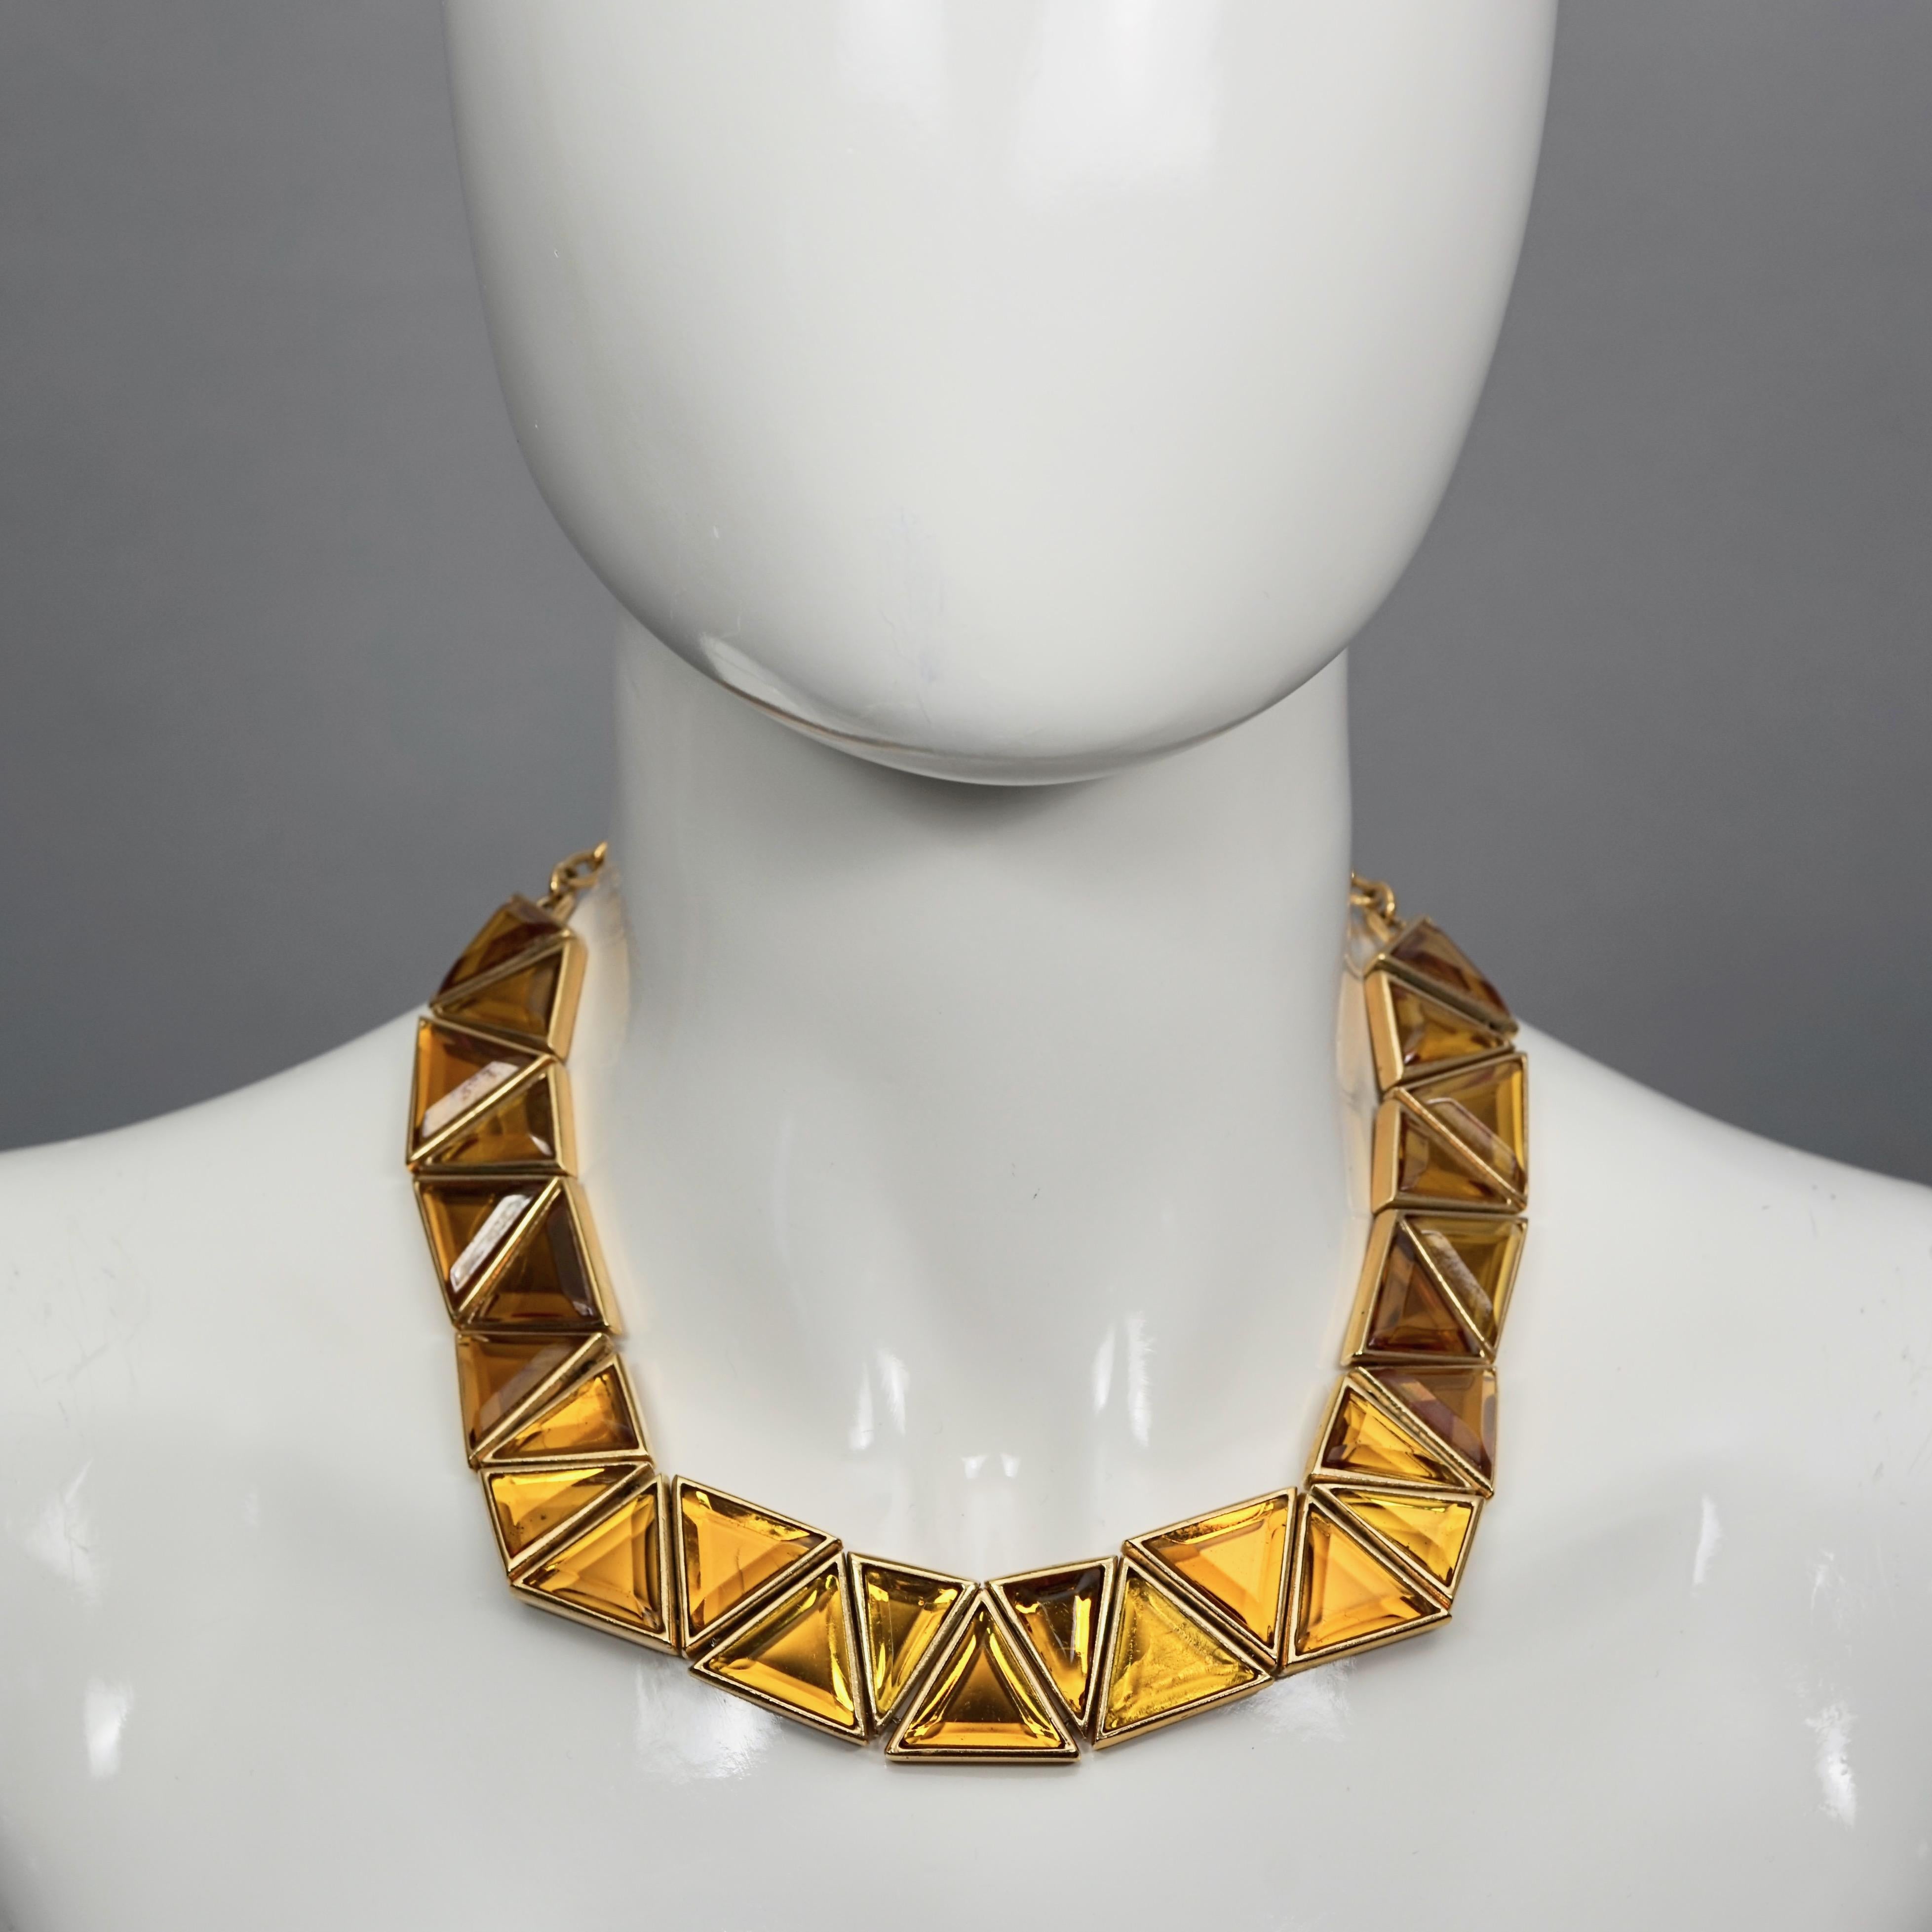 Vintage YVES SAINT LAURENT Ysl Geometric Resin Necklace by Robert Goossens

Measurements:
Height: 0.90 inch (2.3 cm)
Wearable Length: 14.17 inches to 17.32 inches (36 cm to 44 cm)

Features:
- 100% Authentic YVES SAINT LAURENT.
- Geometric resin in